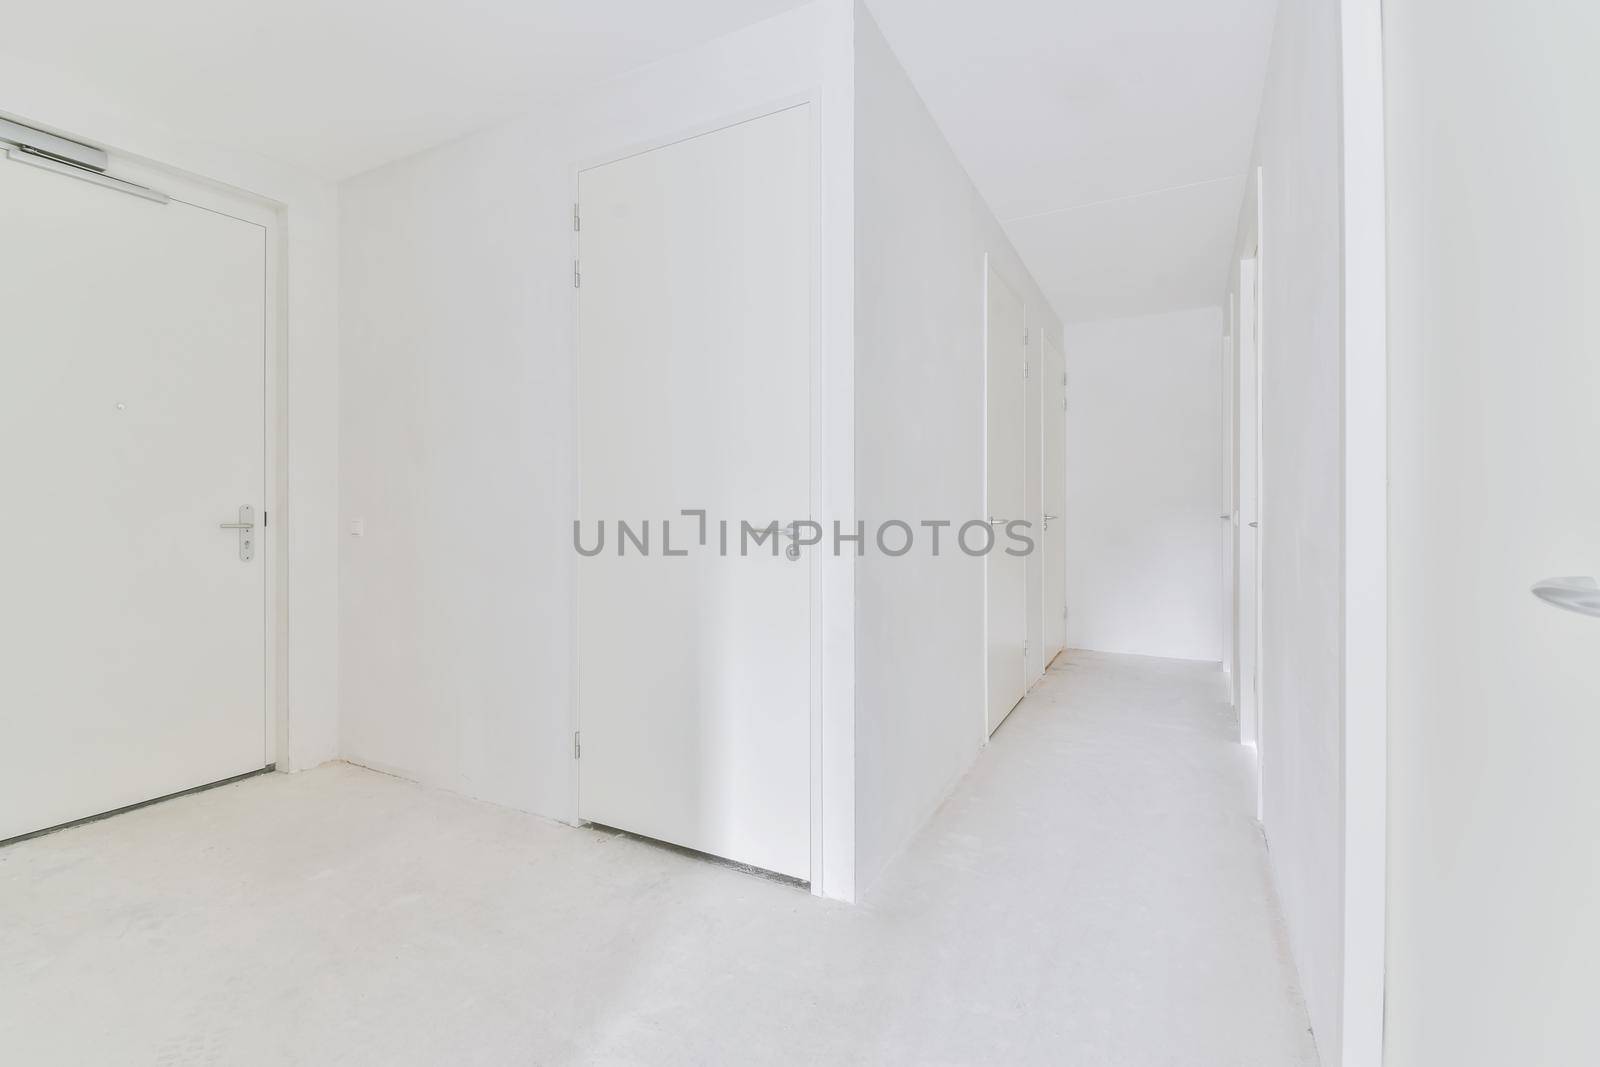 A completely white hallway in an elegant apartment